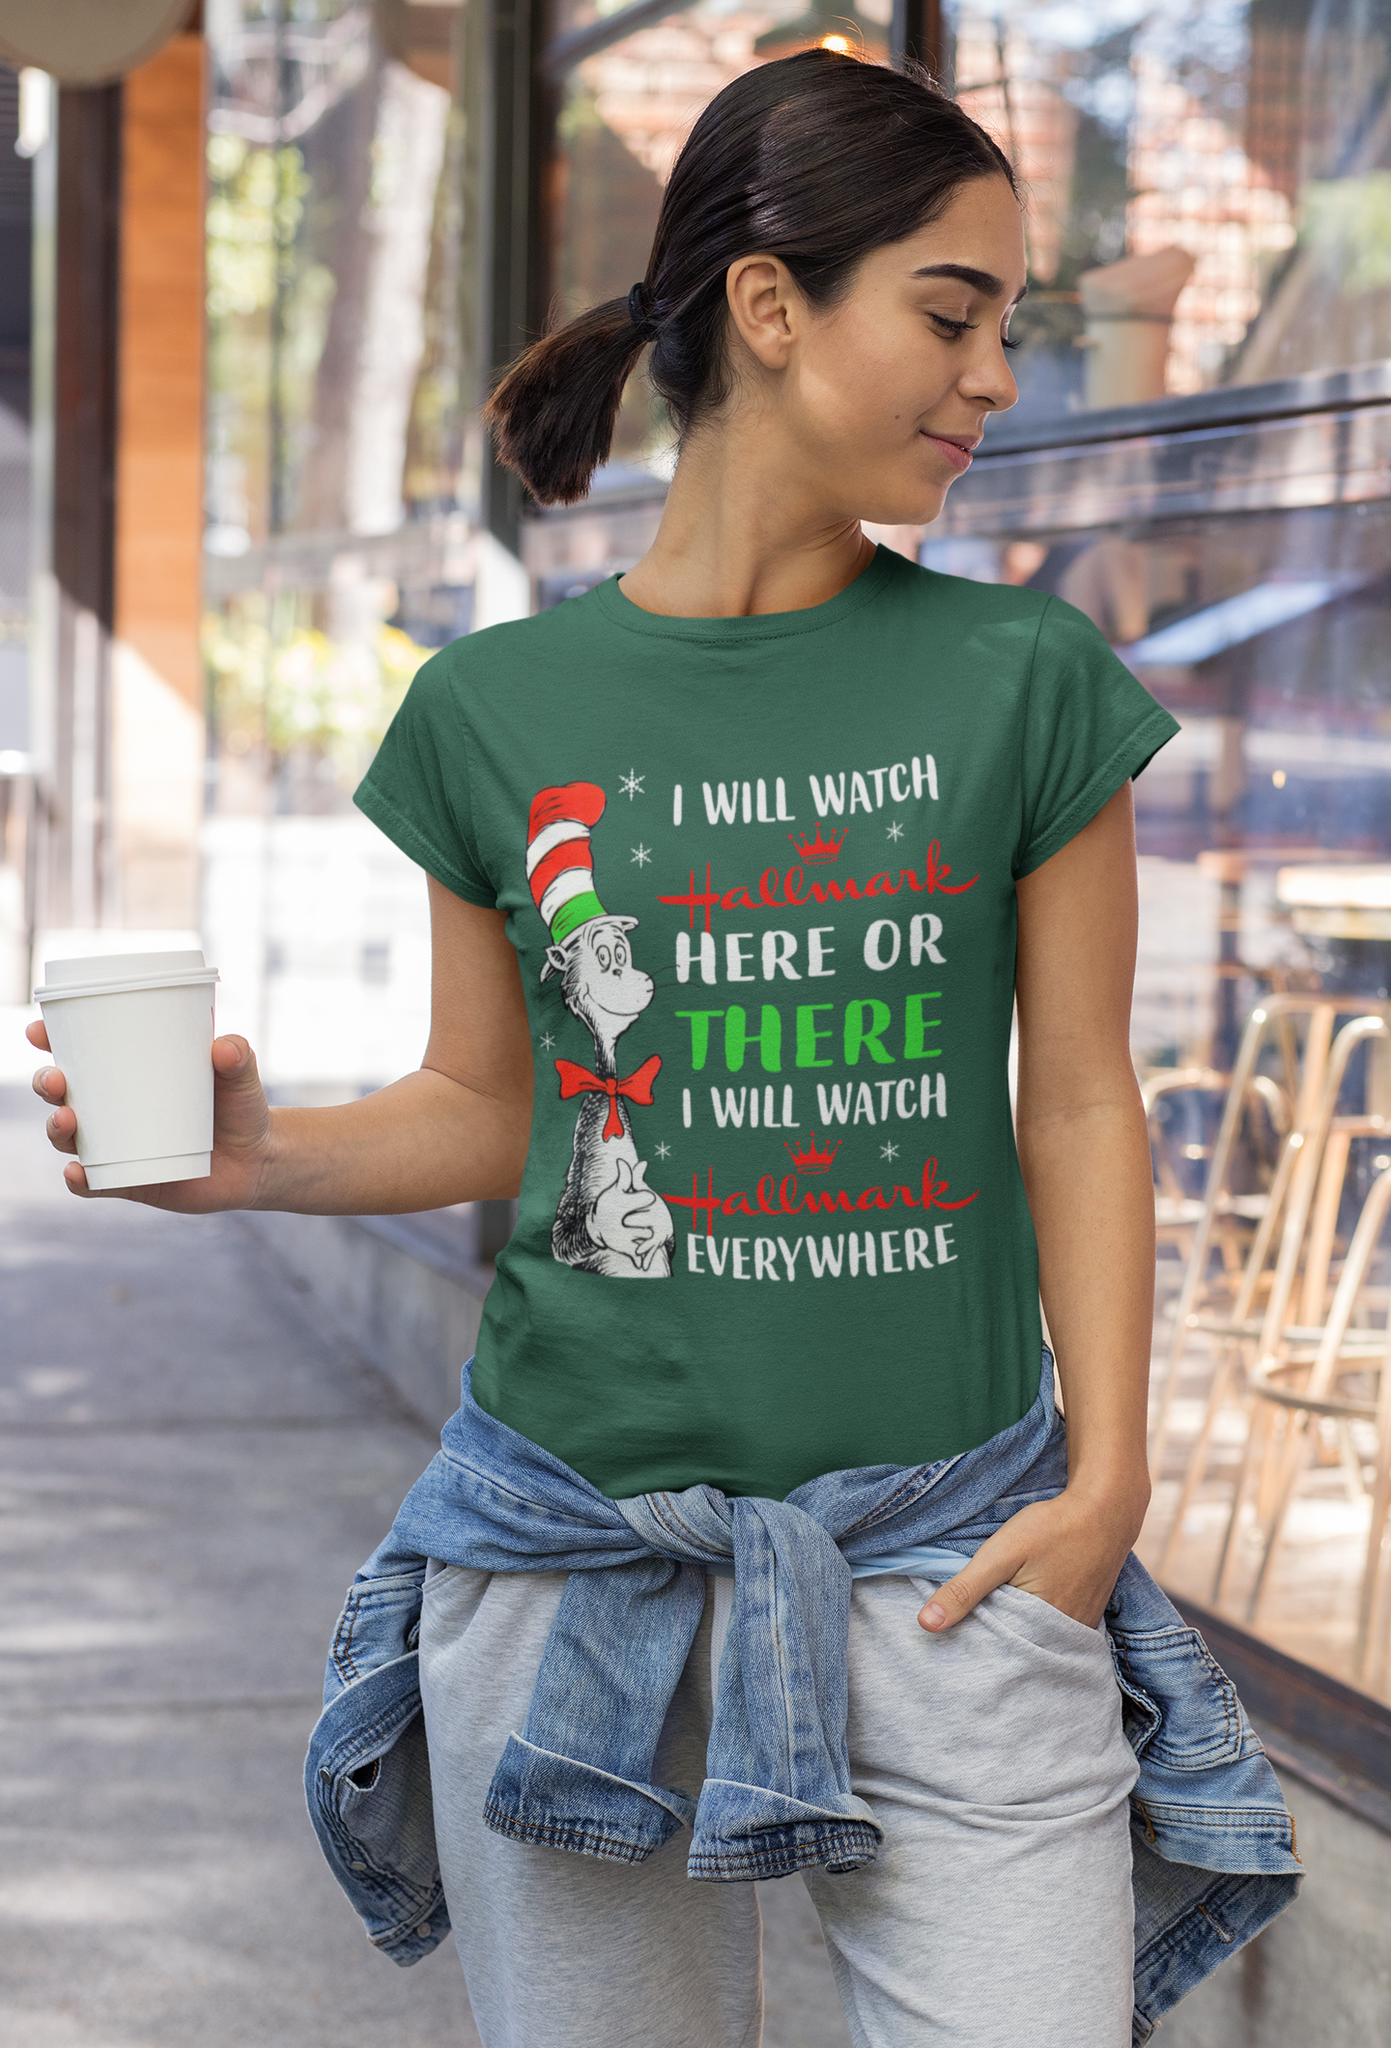 Hallmark Christmas T Shirt, The Cat In The Hat T Shirt, I Will Watch Hallmark Here Or There Tshirt, Christmas Gifts